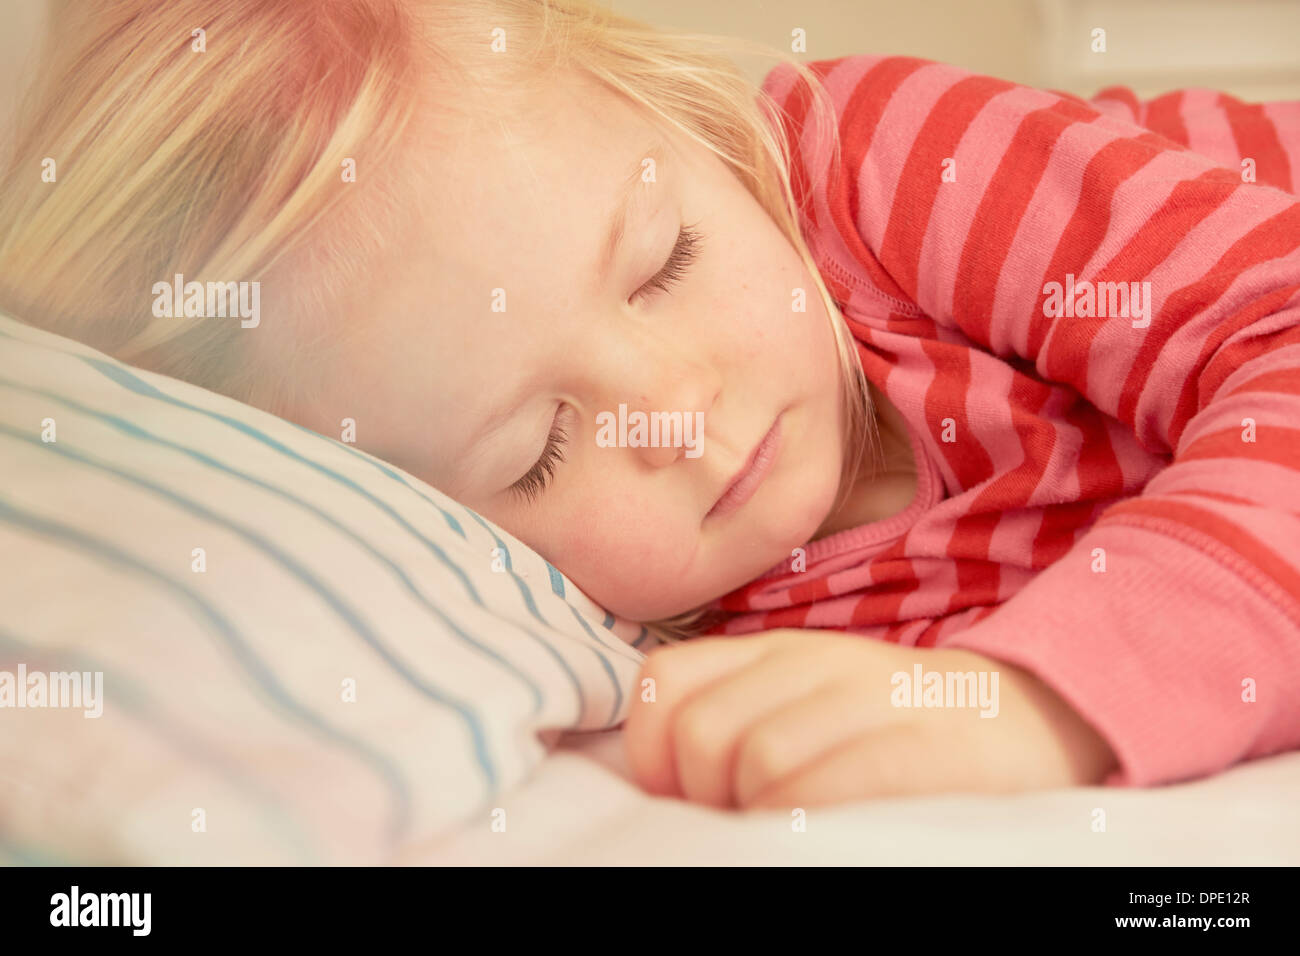 Young girl asleep in bed Stock Photo